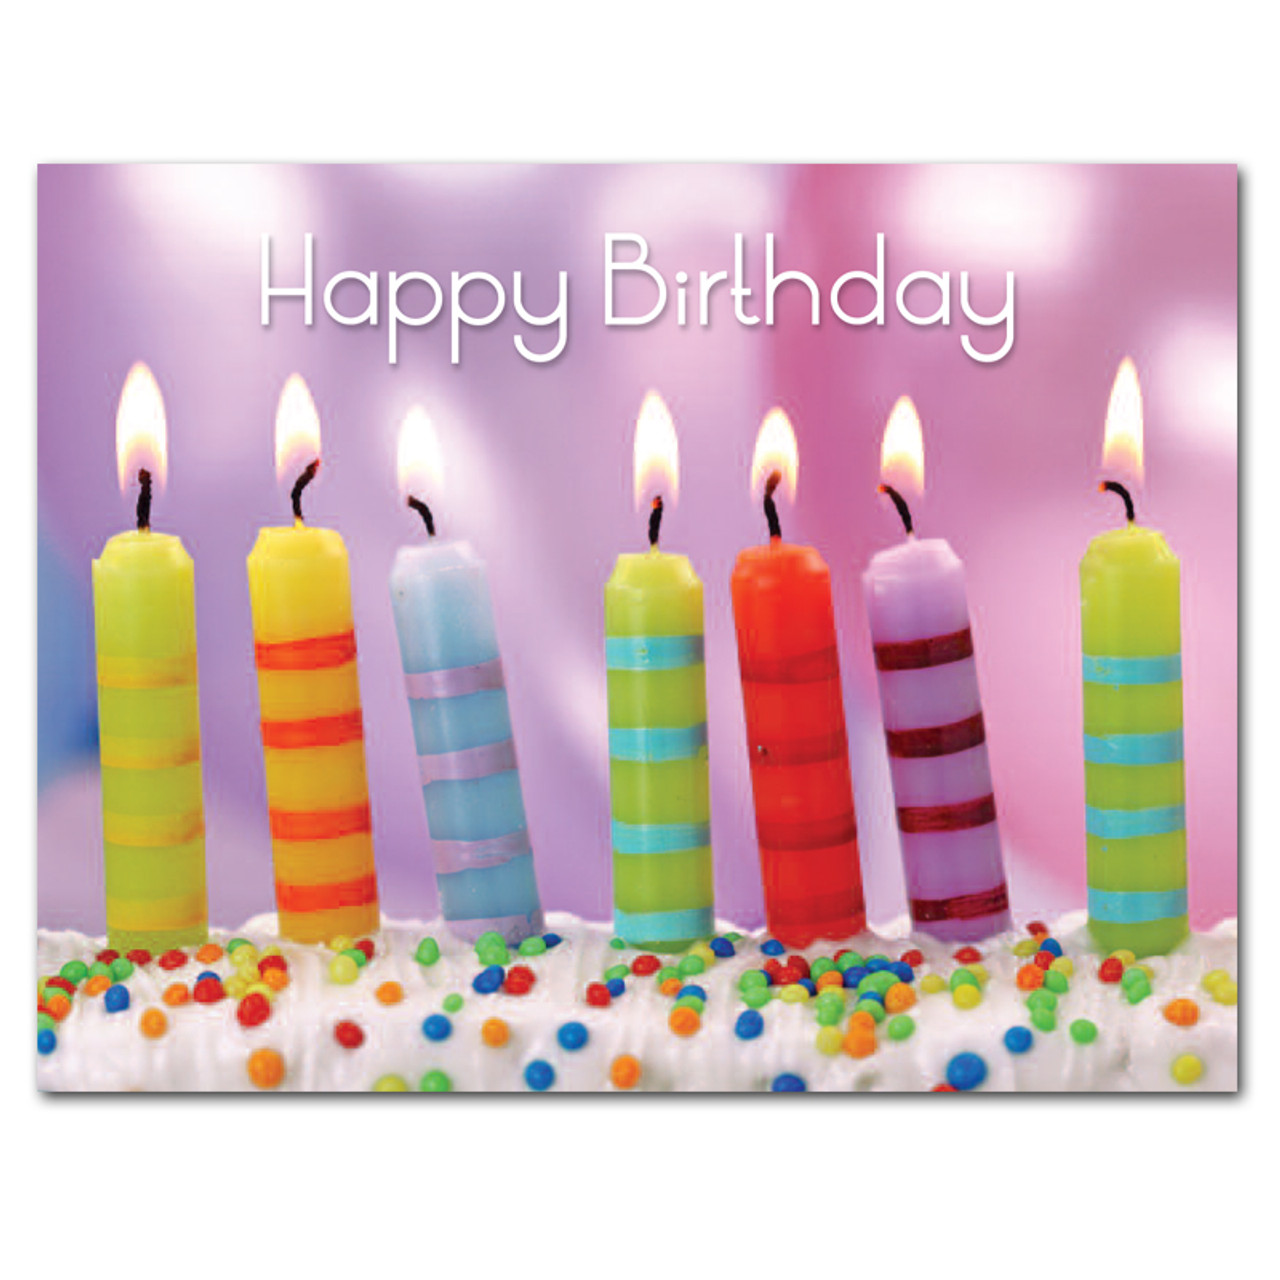 Birthday postcard- “Striped Candles” has photo of 7 striped candles on cake with the words Happy Birthday in bright letters. 